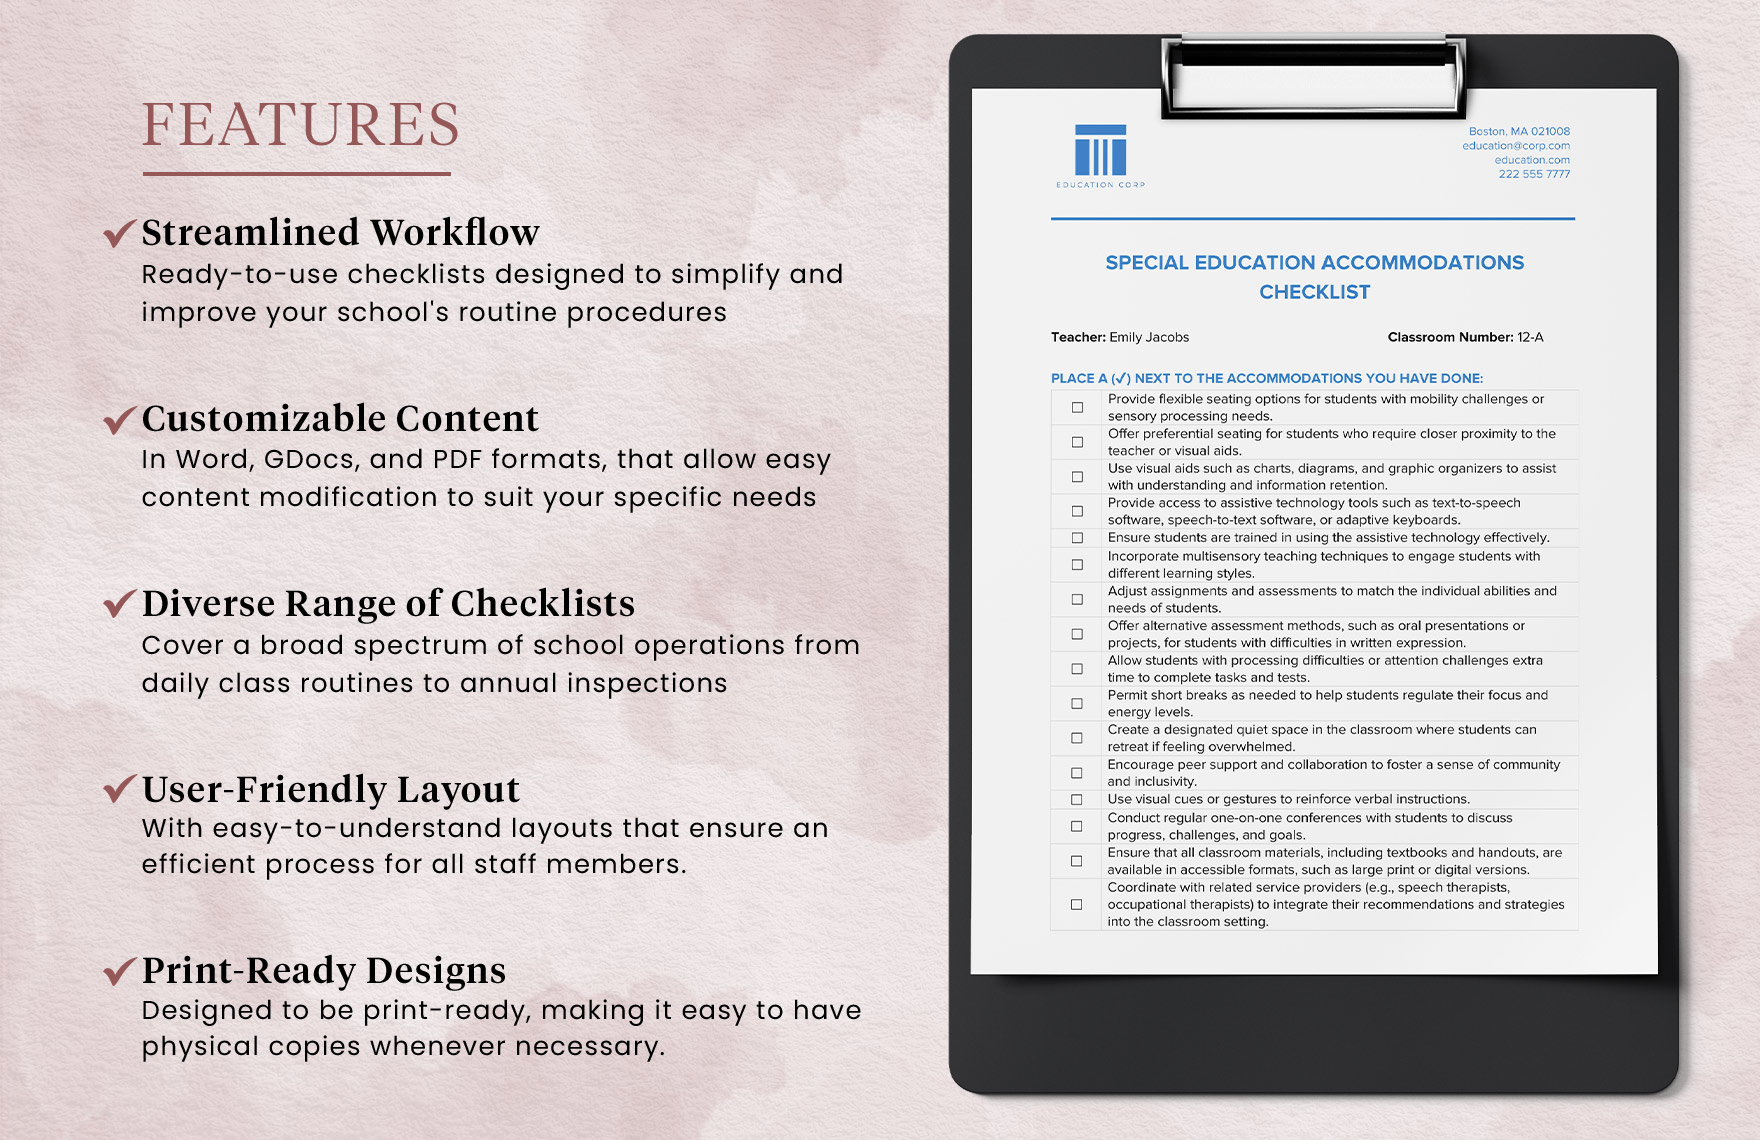 Special Education Accommodations Checklist Template